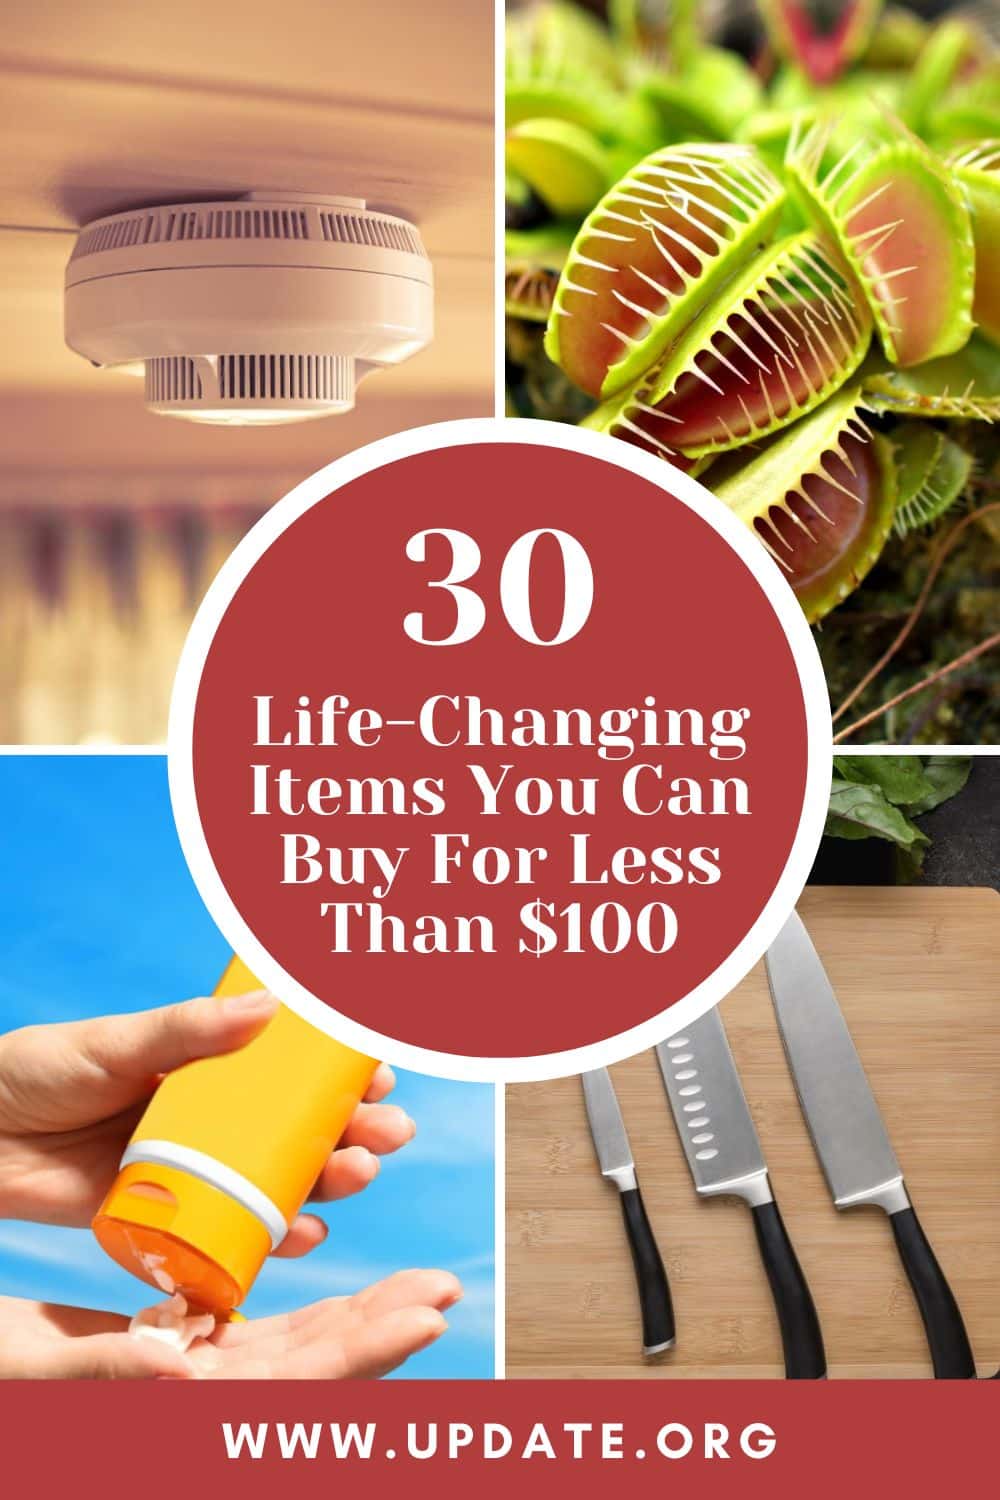 30 Life-Changing Items You Can Buy For Less Than $100 pinterest image.